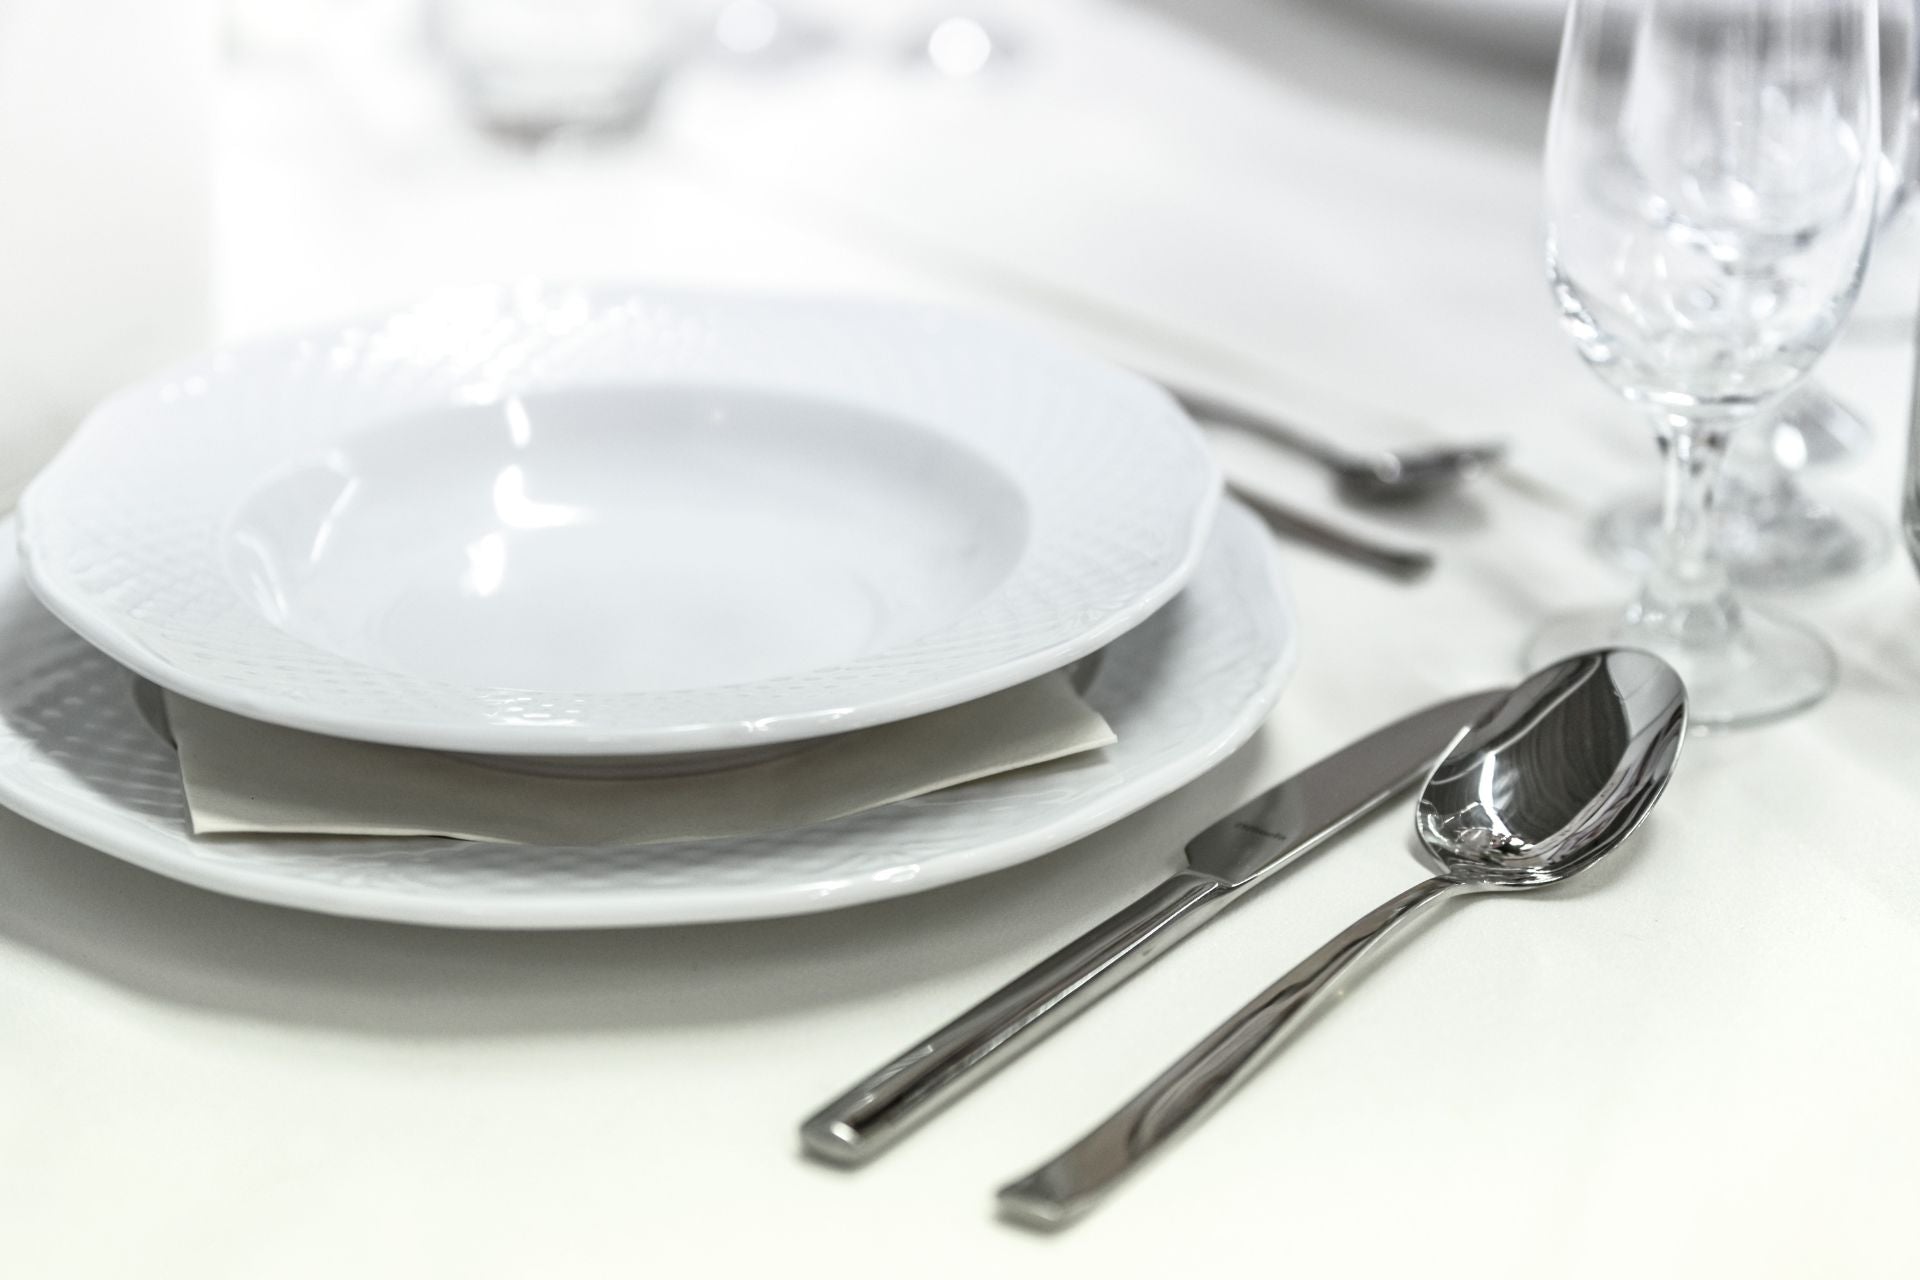 An image of a nicely prepared table setting